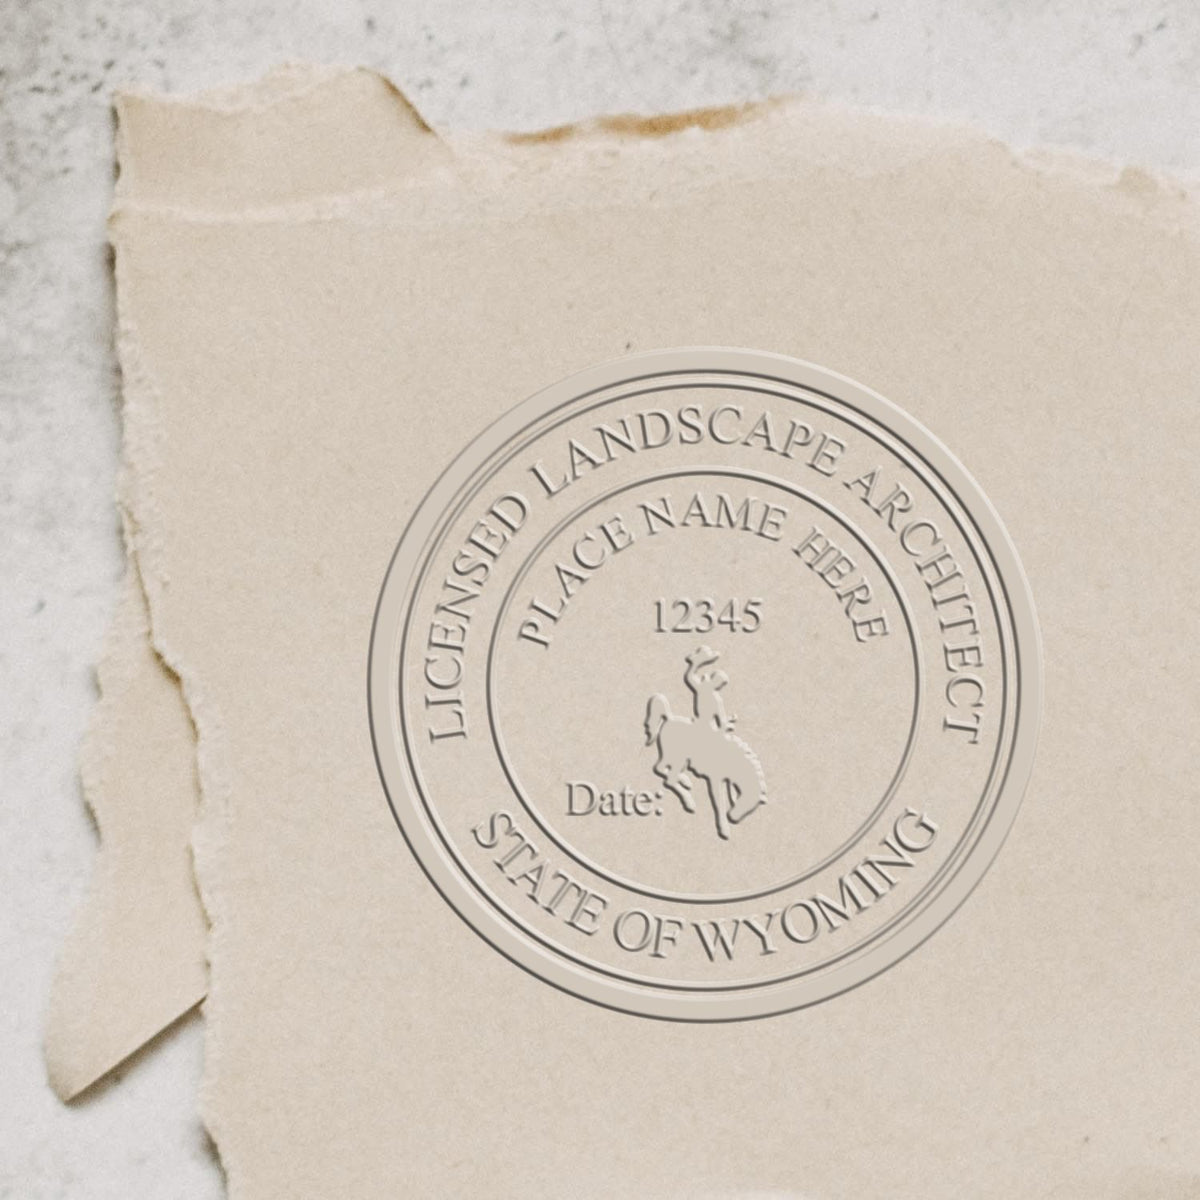 The Gift Wyoming Landscape Architect Seal stamp impression comes to life with a crisp, detailed image stamped on paper - showcasing true professional quality.